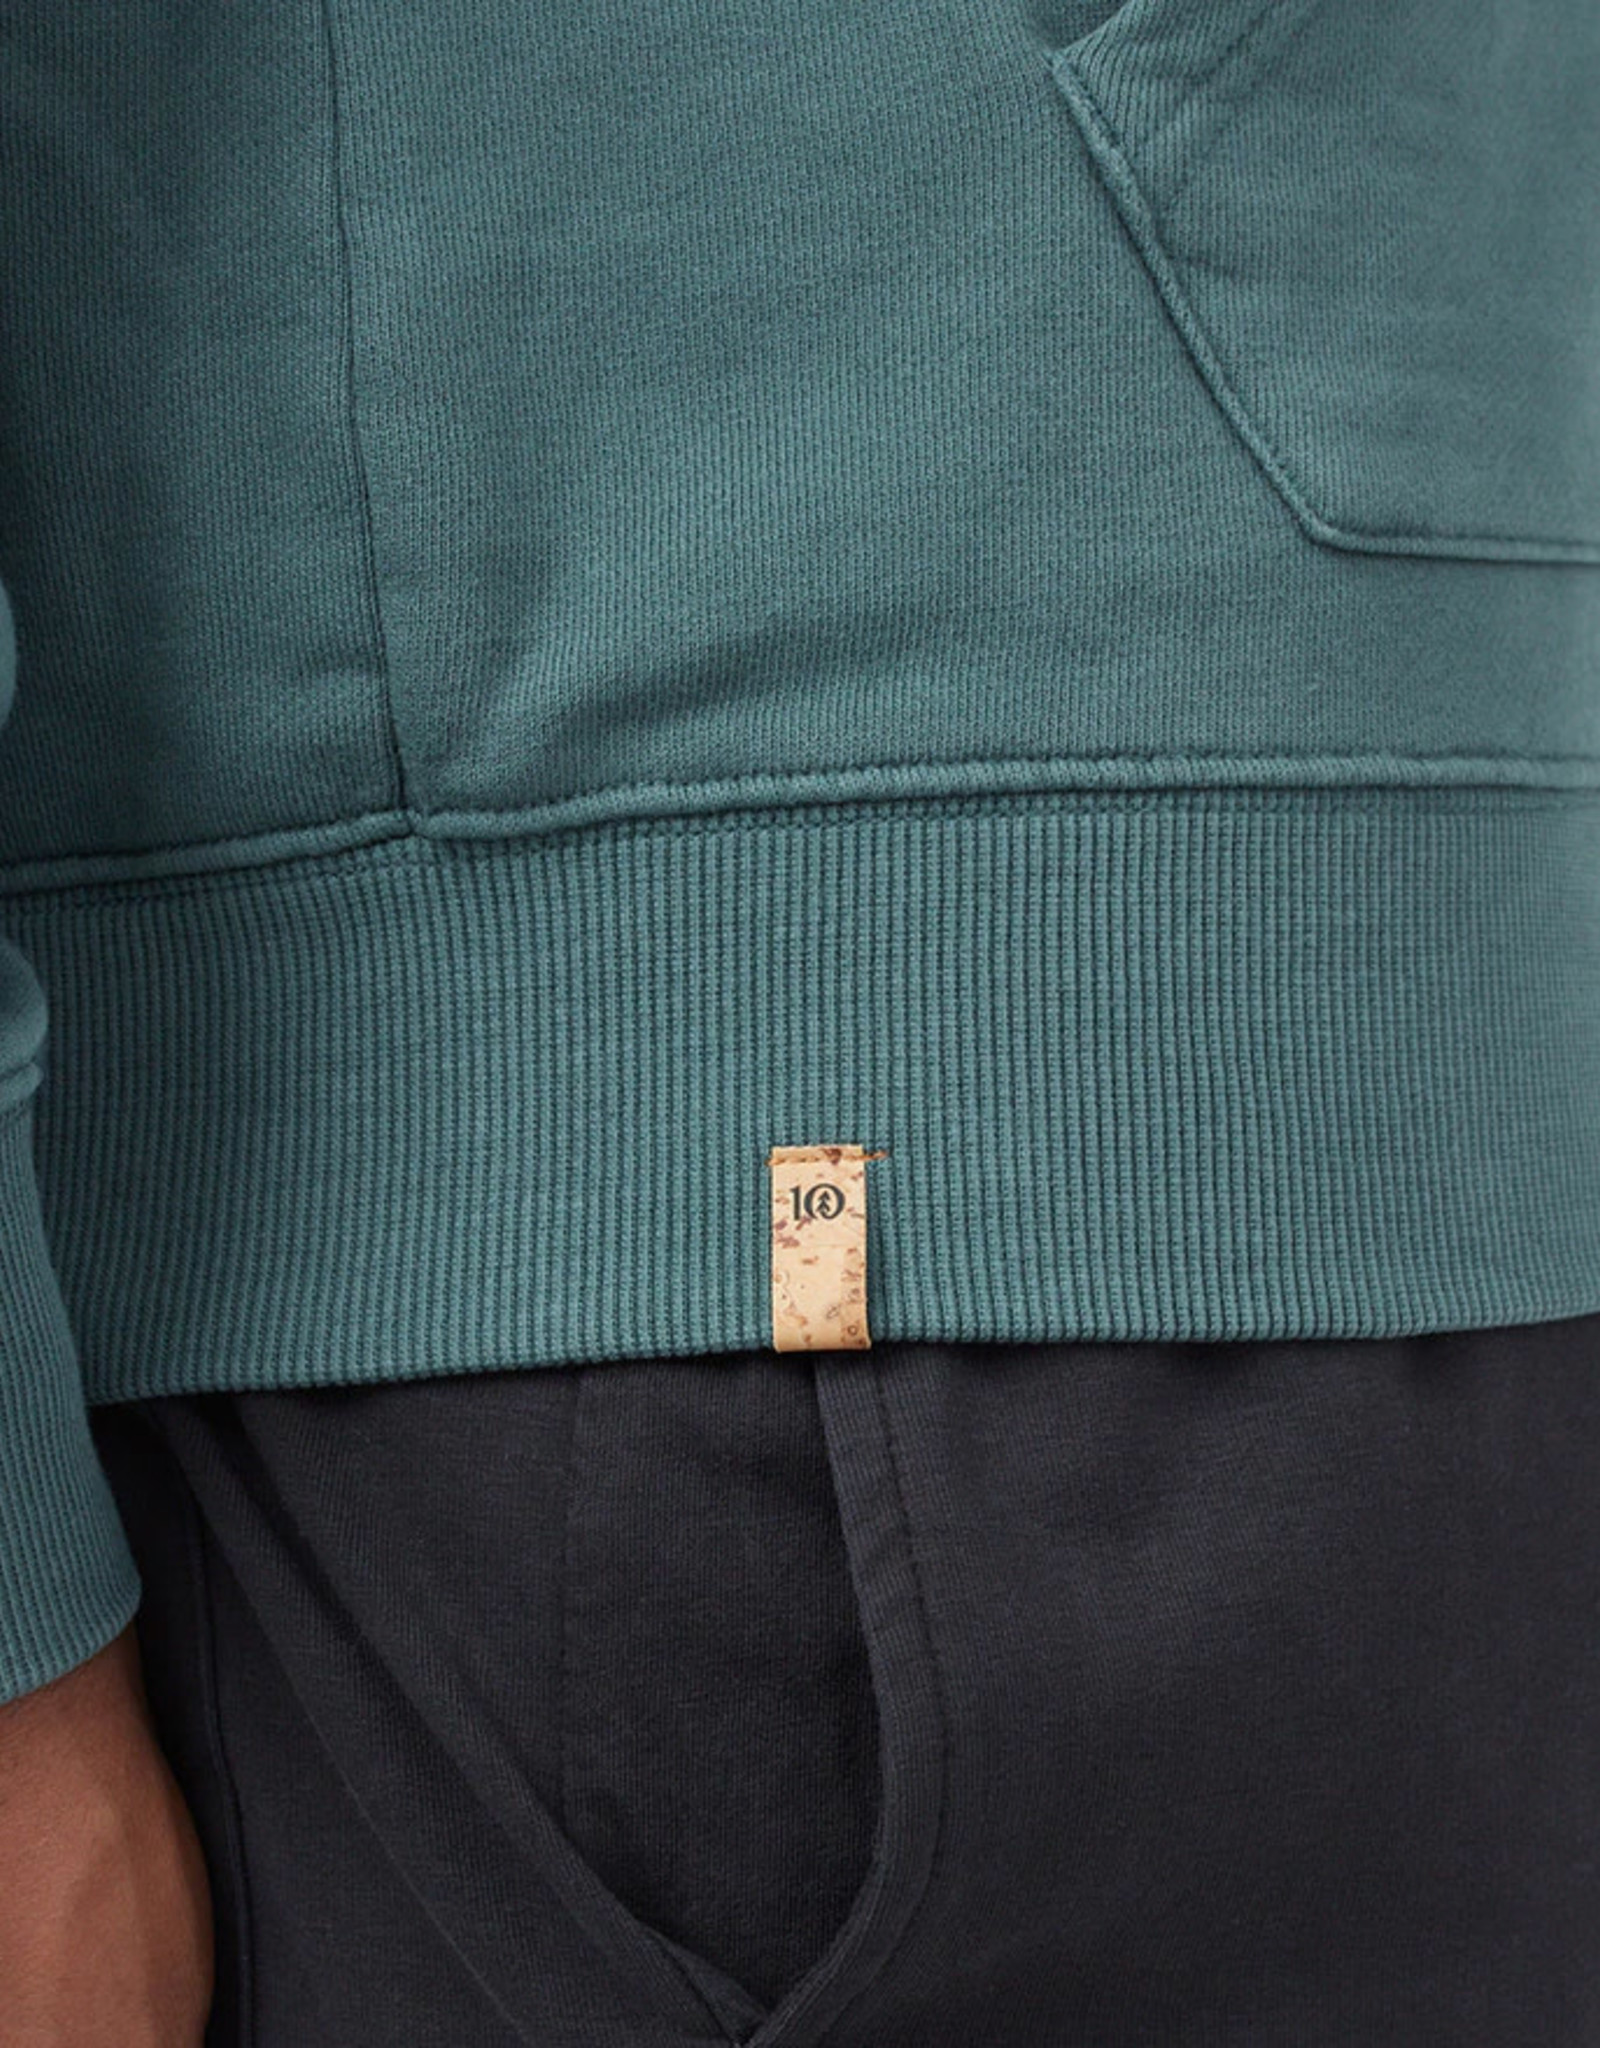 tentree French Terry Hoodie - Sea Green